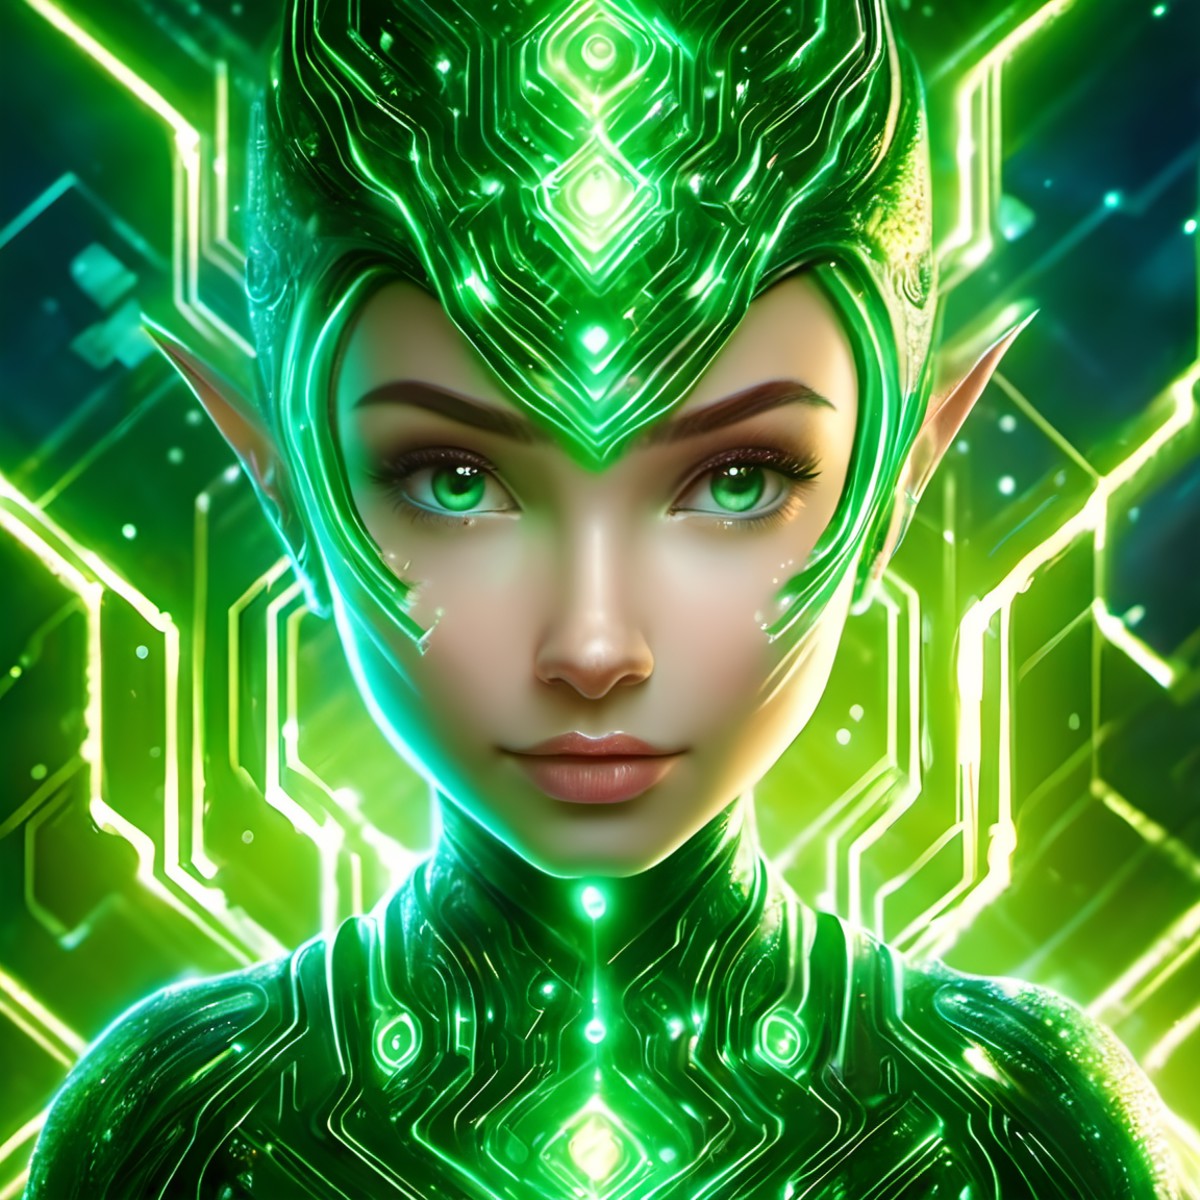 iccircuitart,green theme,<lora:iccircuitart:1>,, portrait of a CGI animation character, magical background, bright natural...